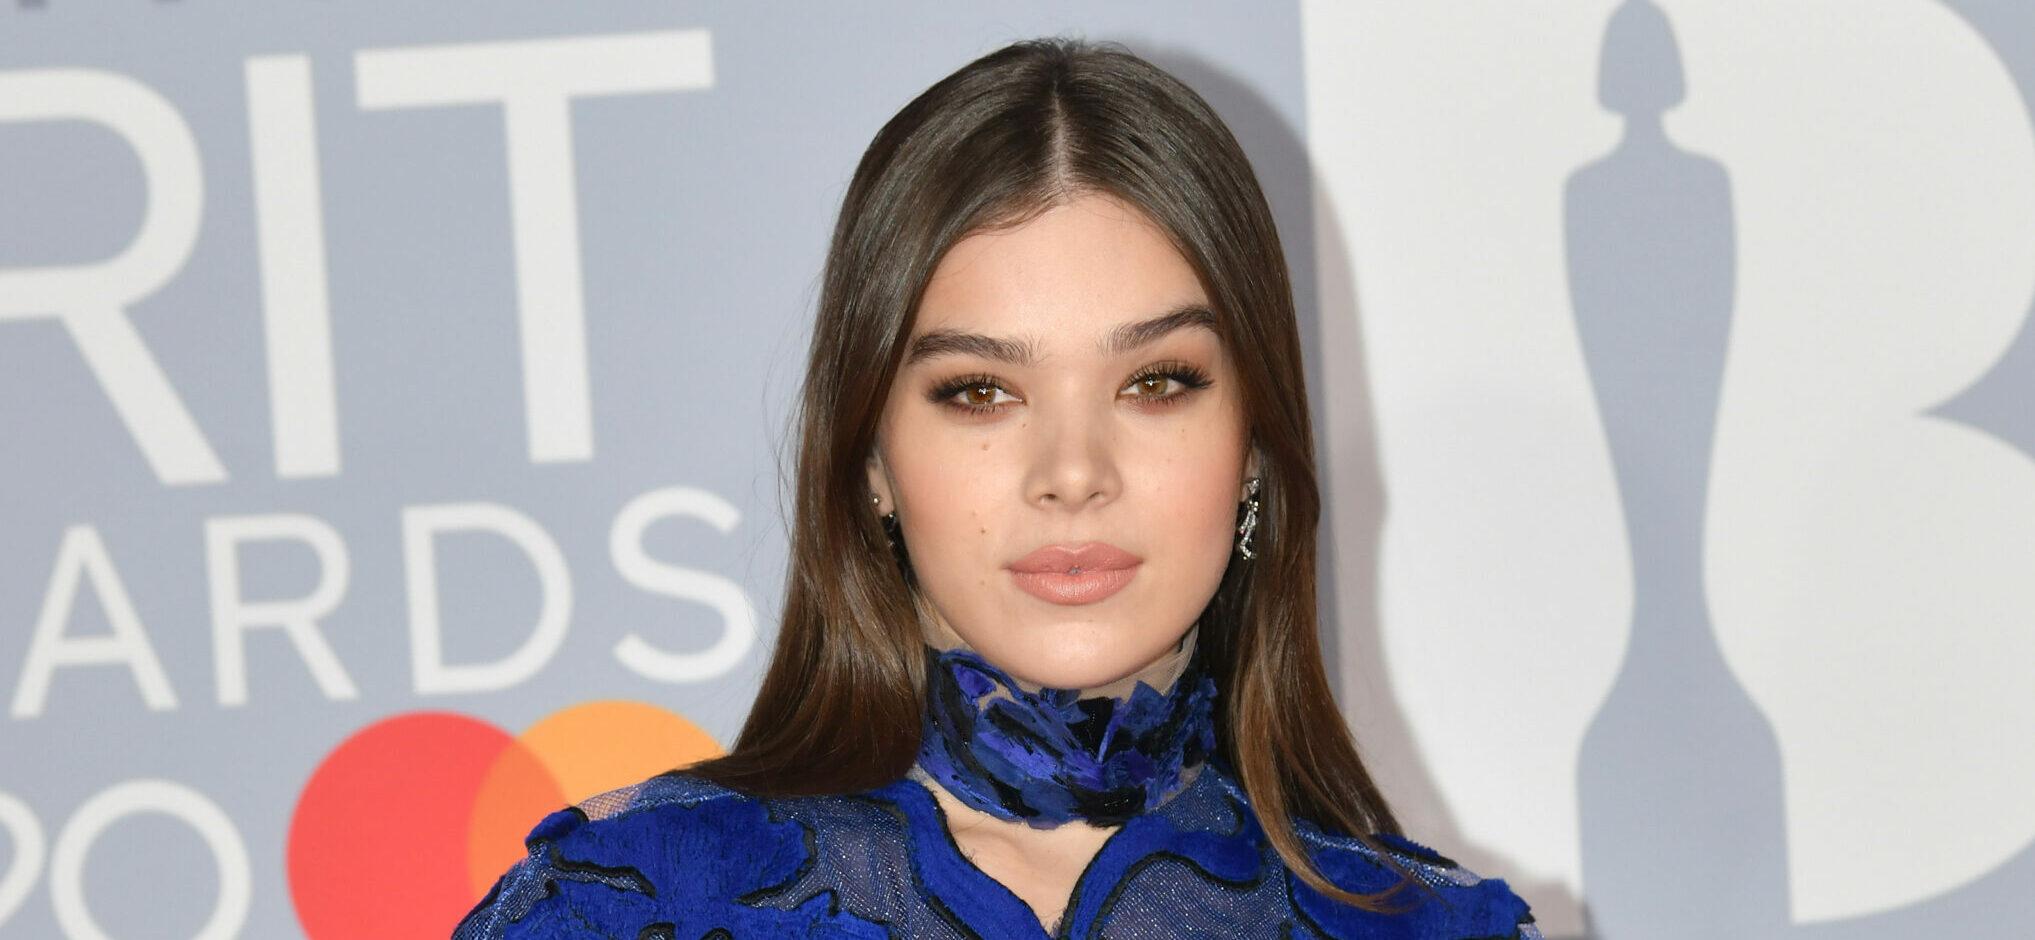 Hailee Steinfeld at the 40th BRIT Awards show Tuesday 18th February at The O2 Arena in London